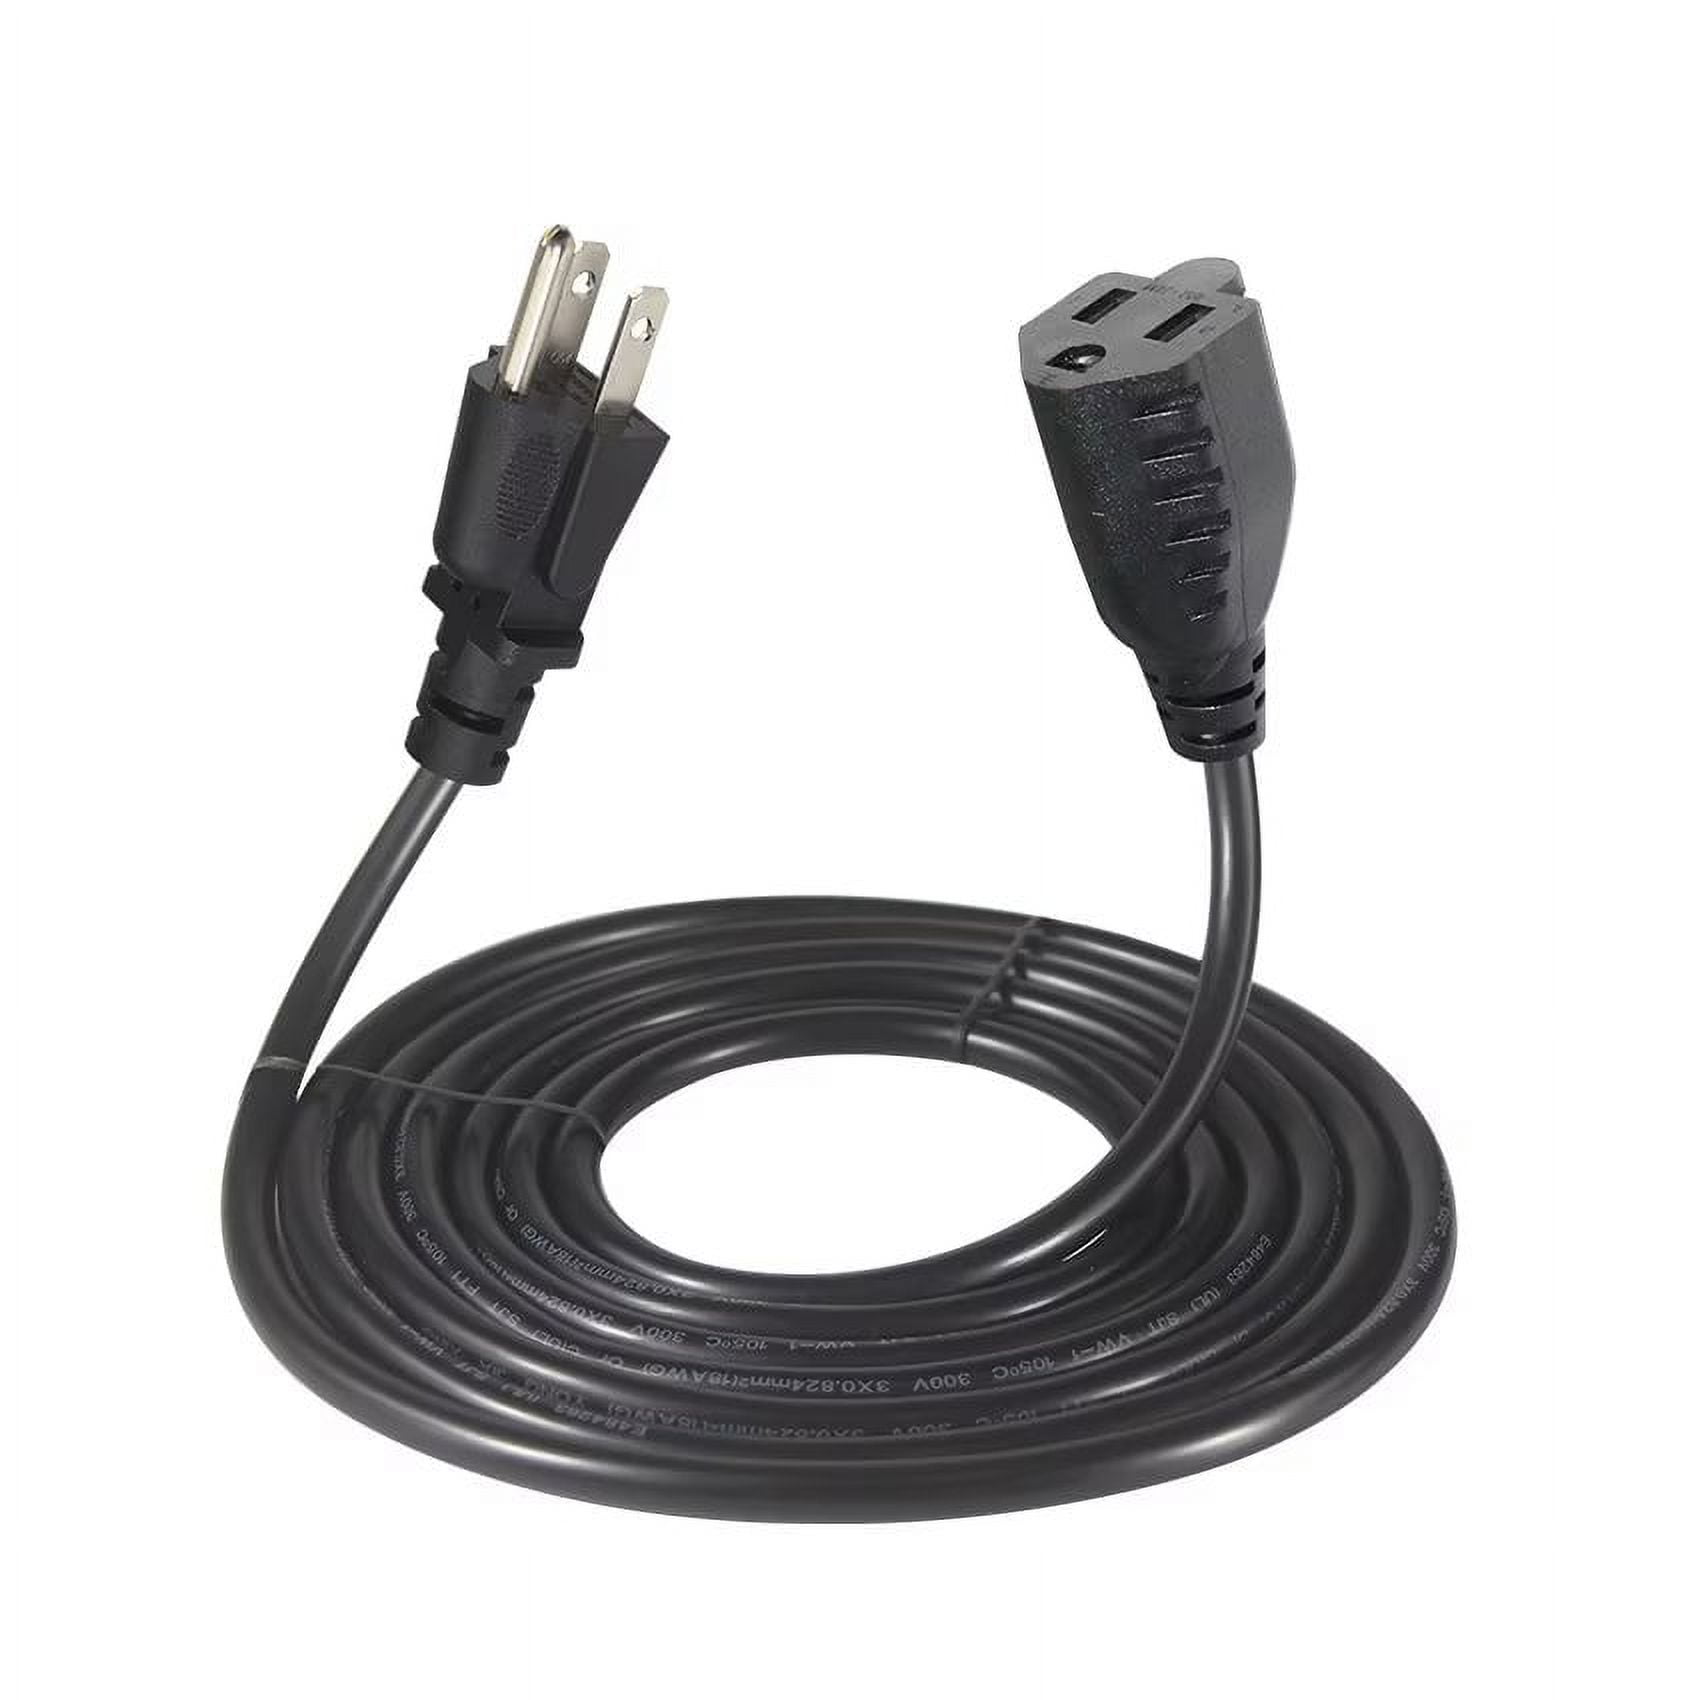 StarTech.com 10ft 3m Power Extension Cord NEMA5 15R to NEMA5 15P Black  Extension Cord 13A 125V 16AWG Computer Power Extension Cable - Office Depot